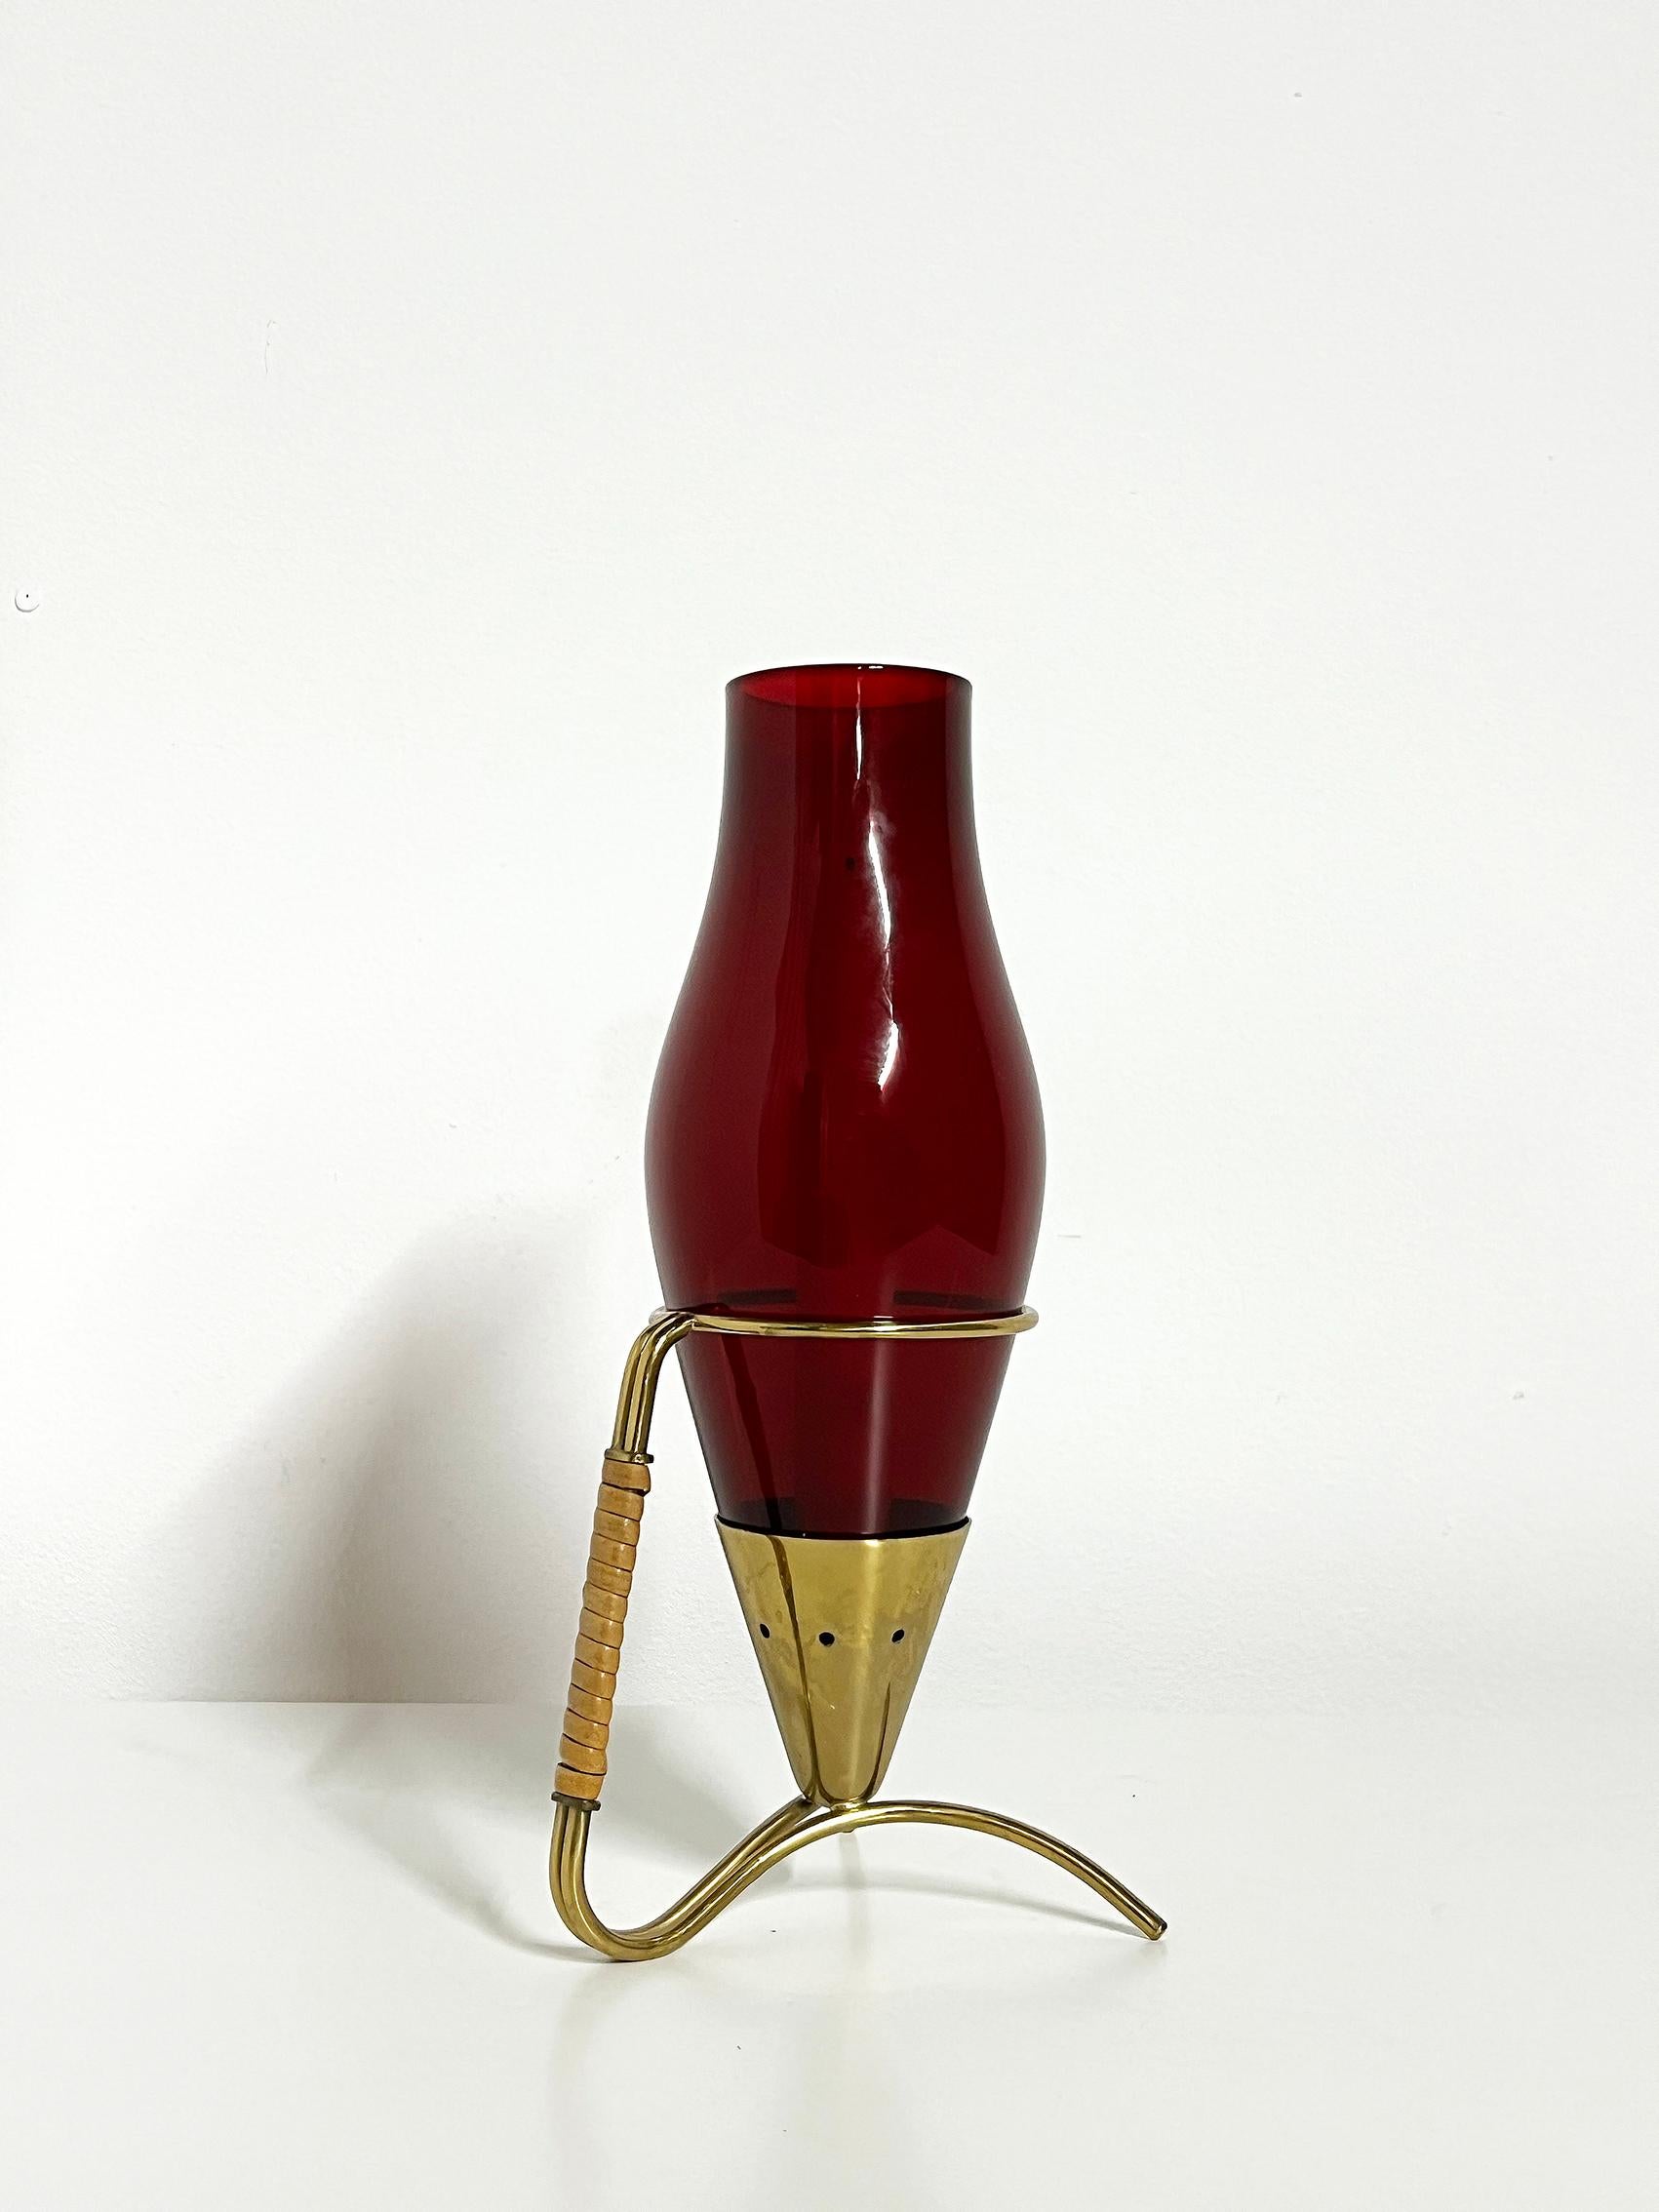 Scandinavian Modern Candle Holder, Gunnar Ander for Ystad Metall ca 1950's In Good Condition For Sale In Örebro, SE